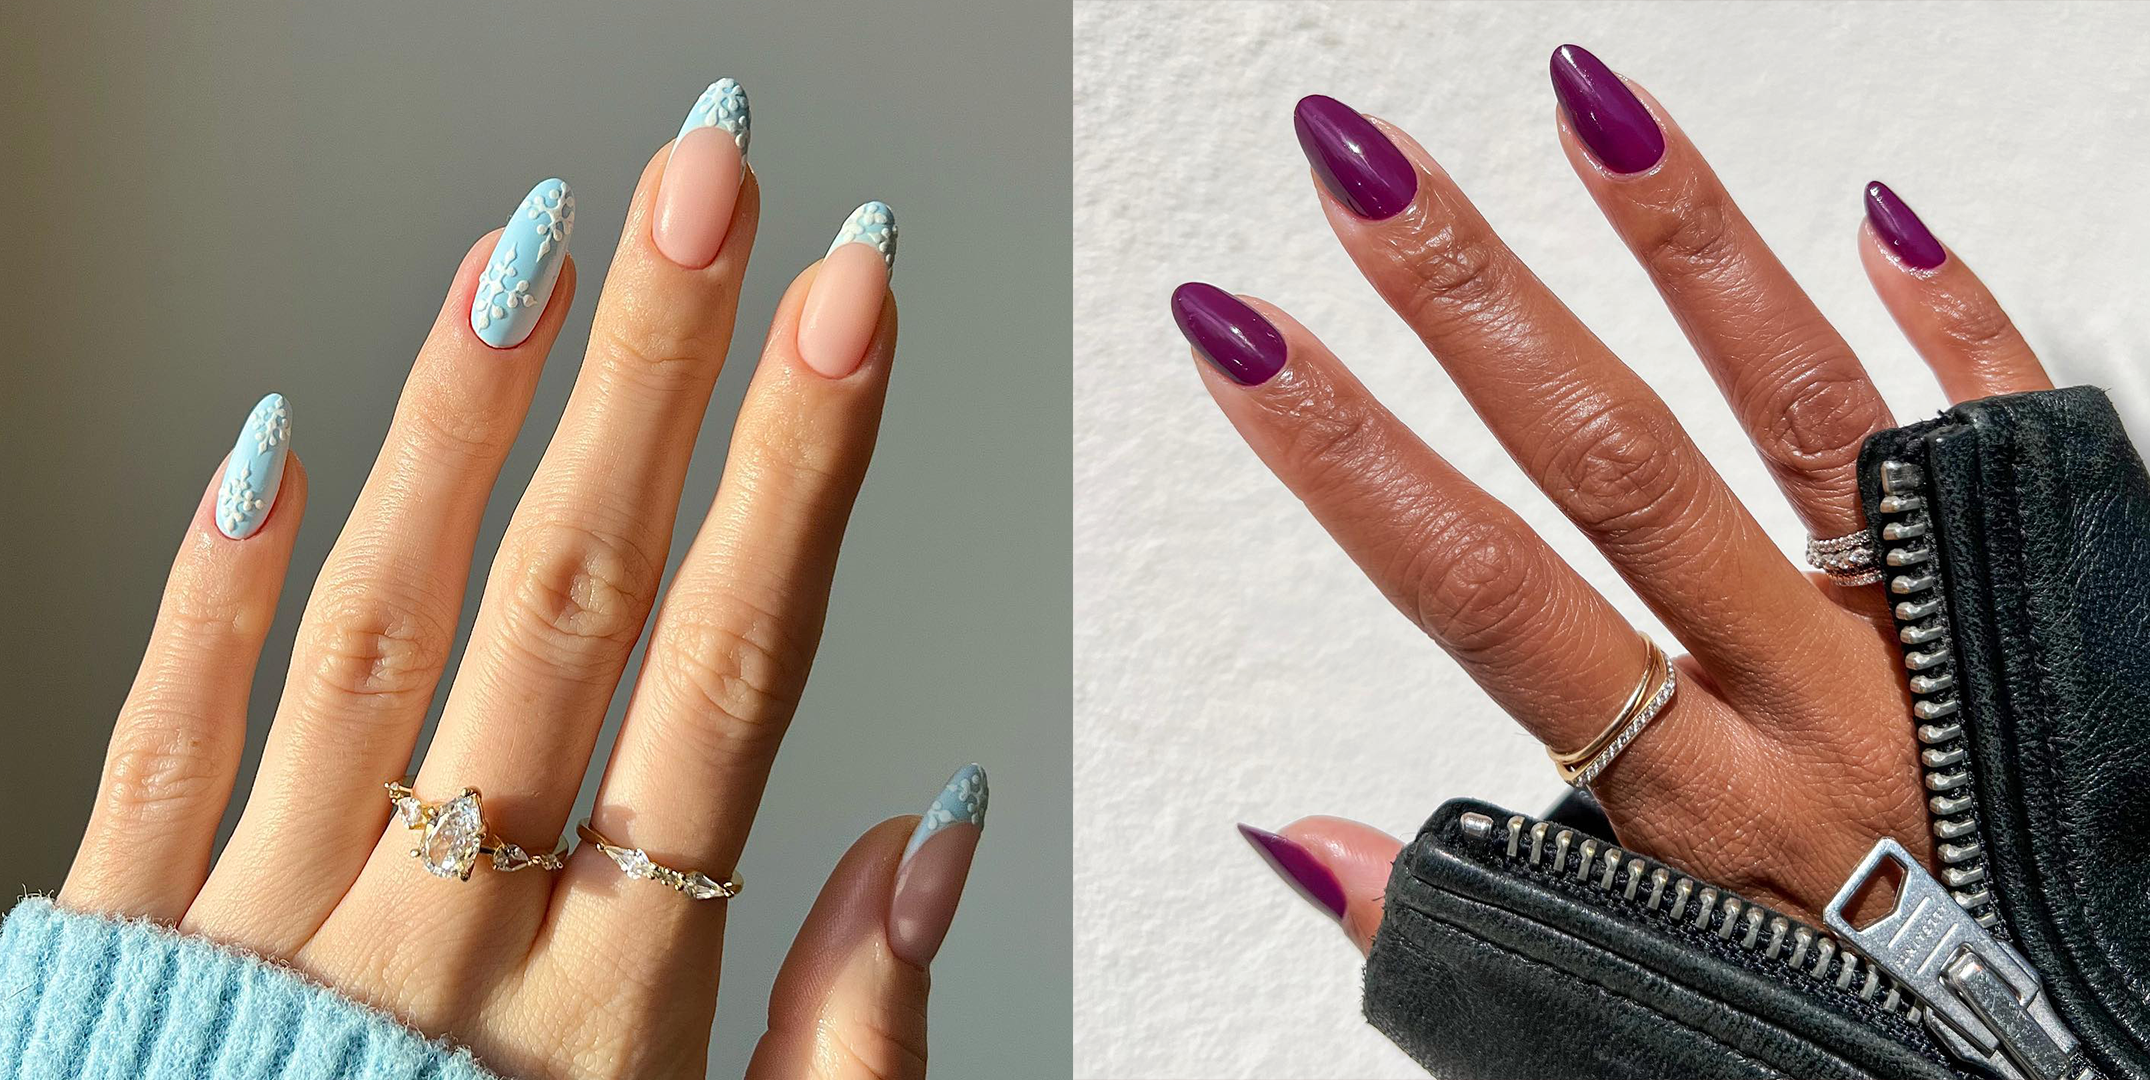 10 Popular Winter Nail Colors for 2019 - An Unblurred Lady | Nail colors  winter, Nail colors, Summer acrylic nails